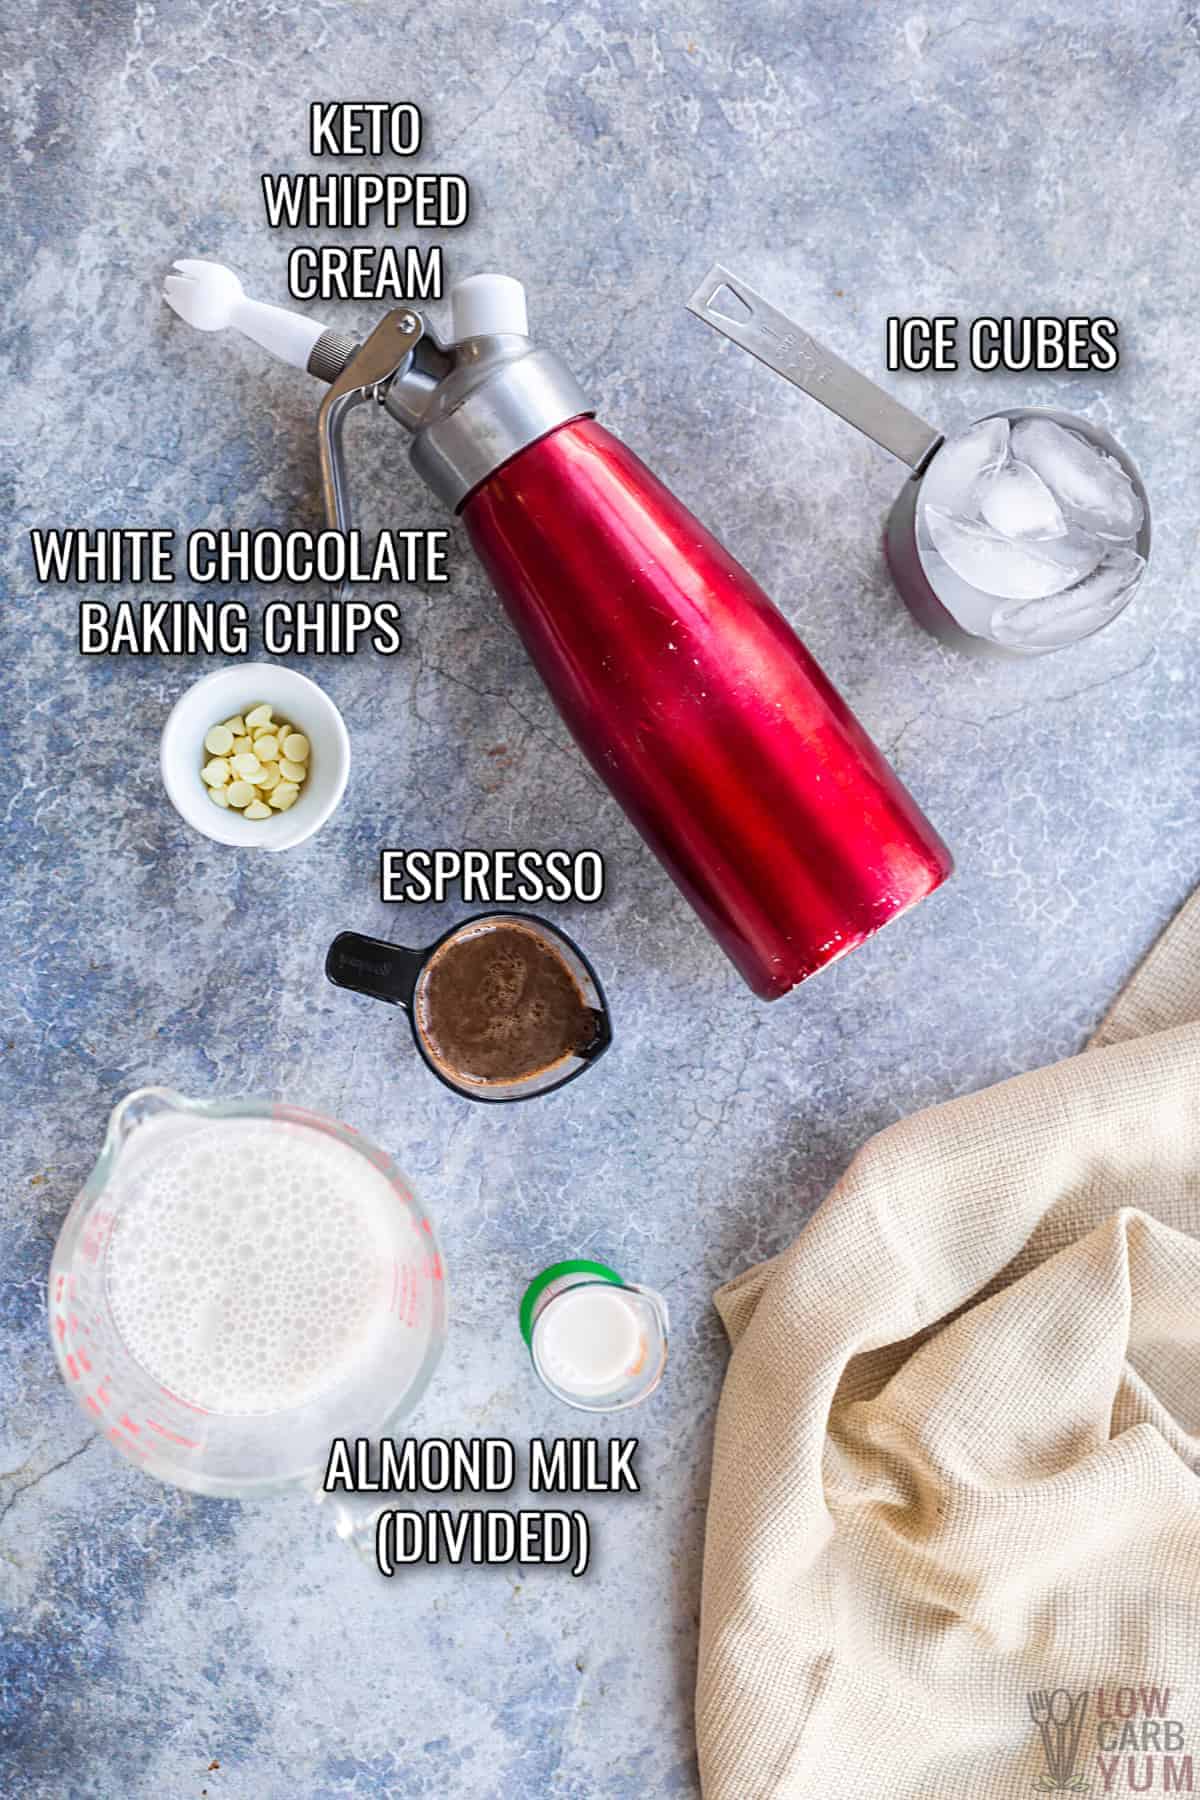 ingredients for the iced white chocolate mocha recipe.